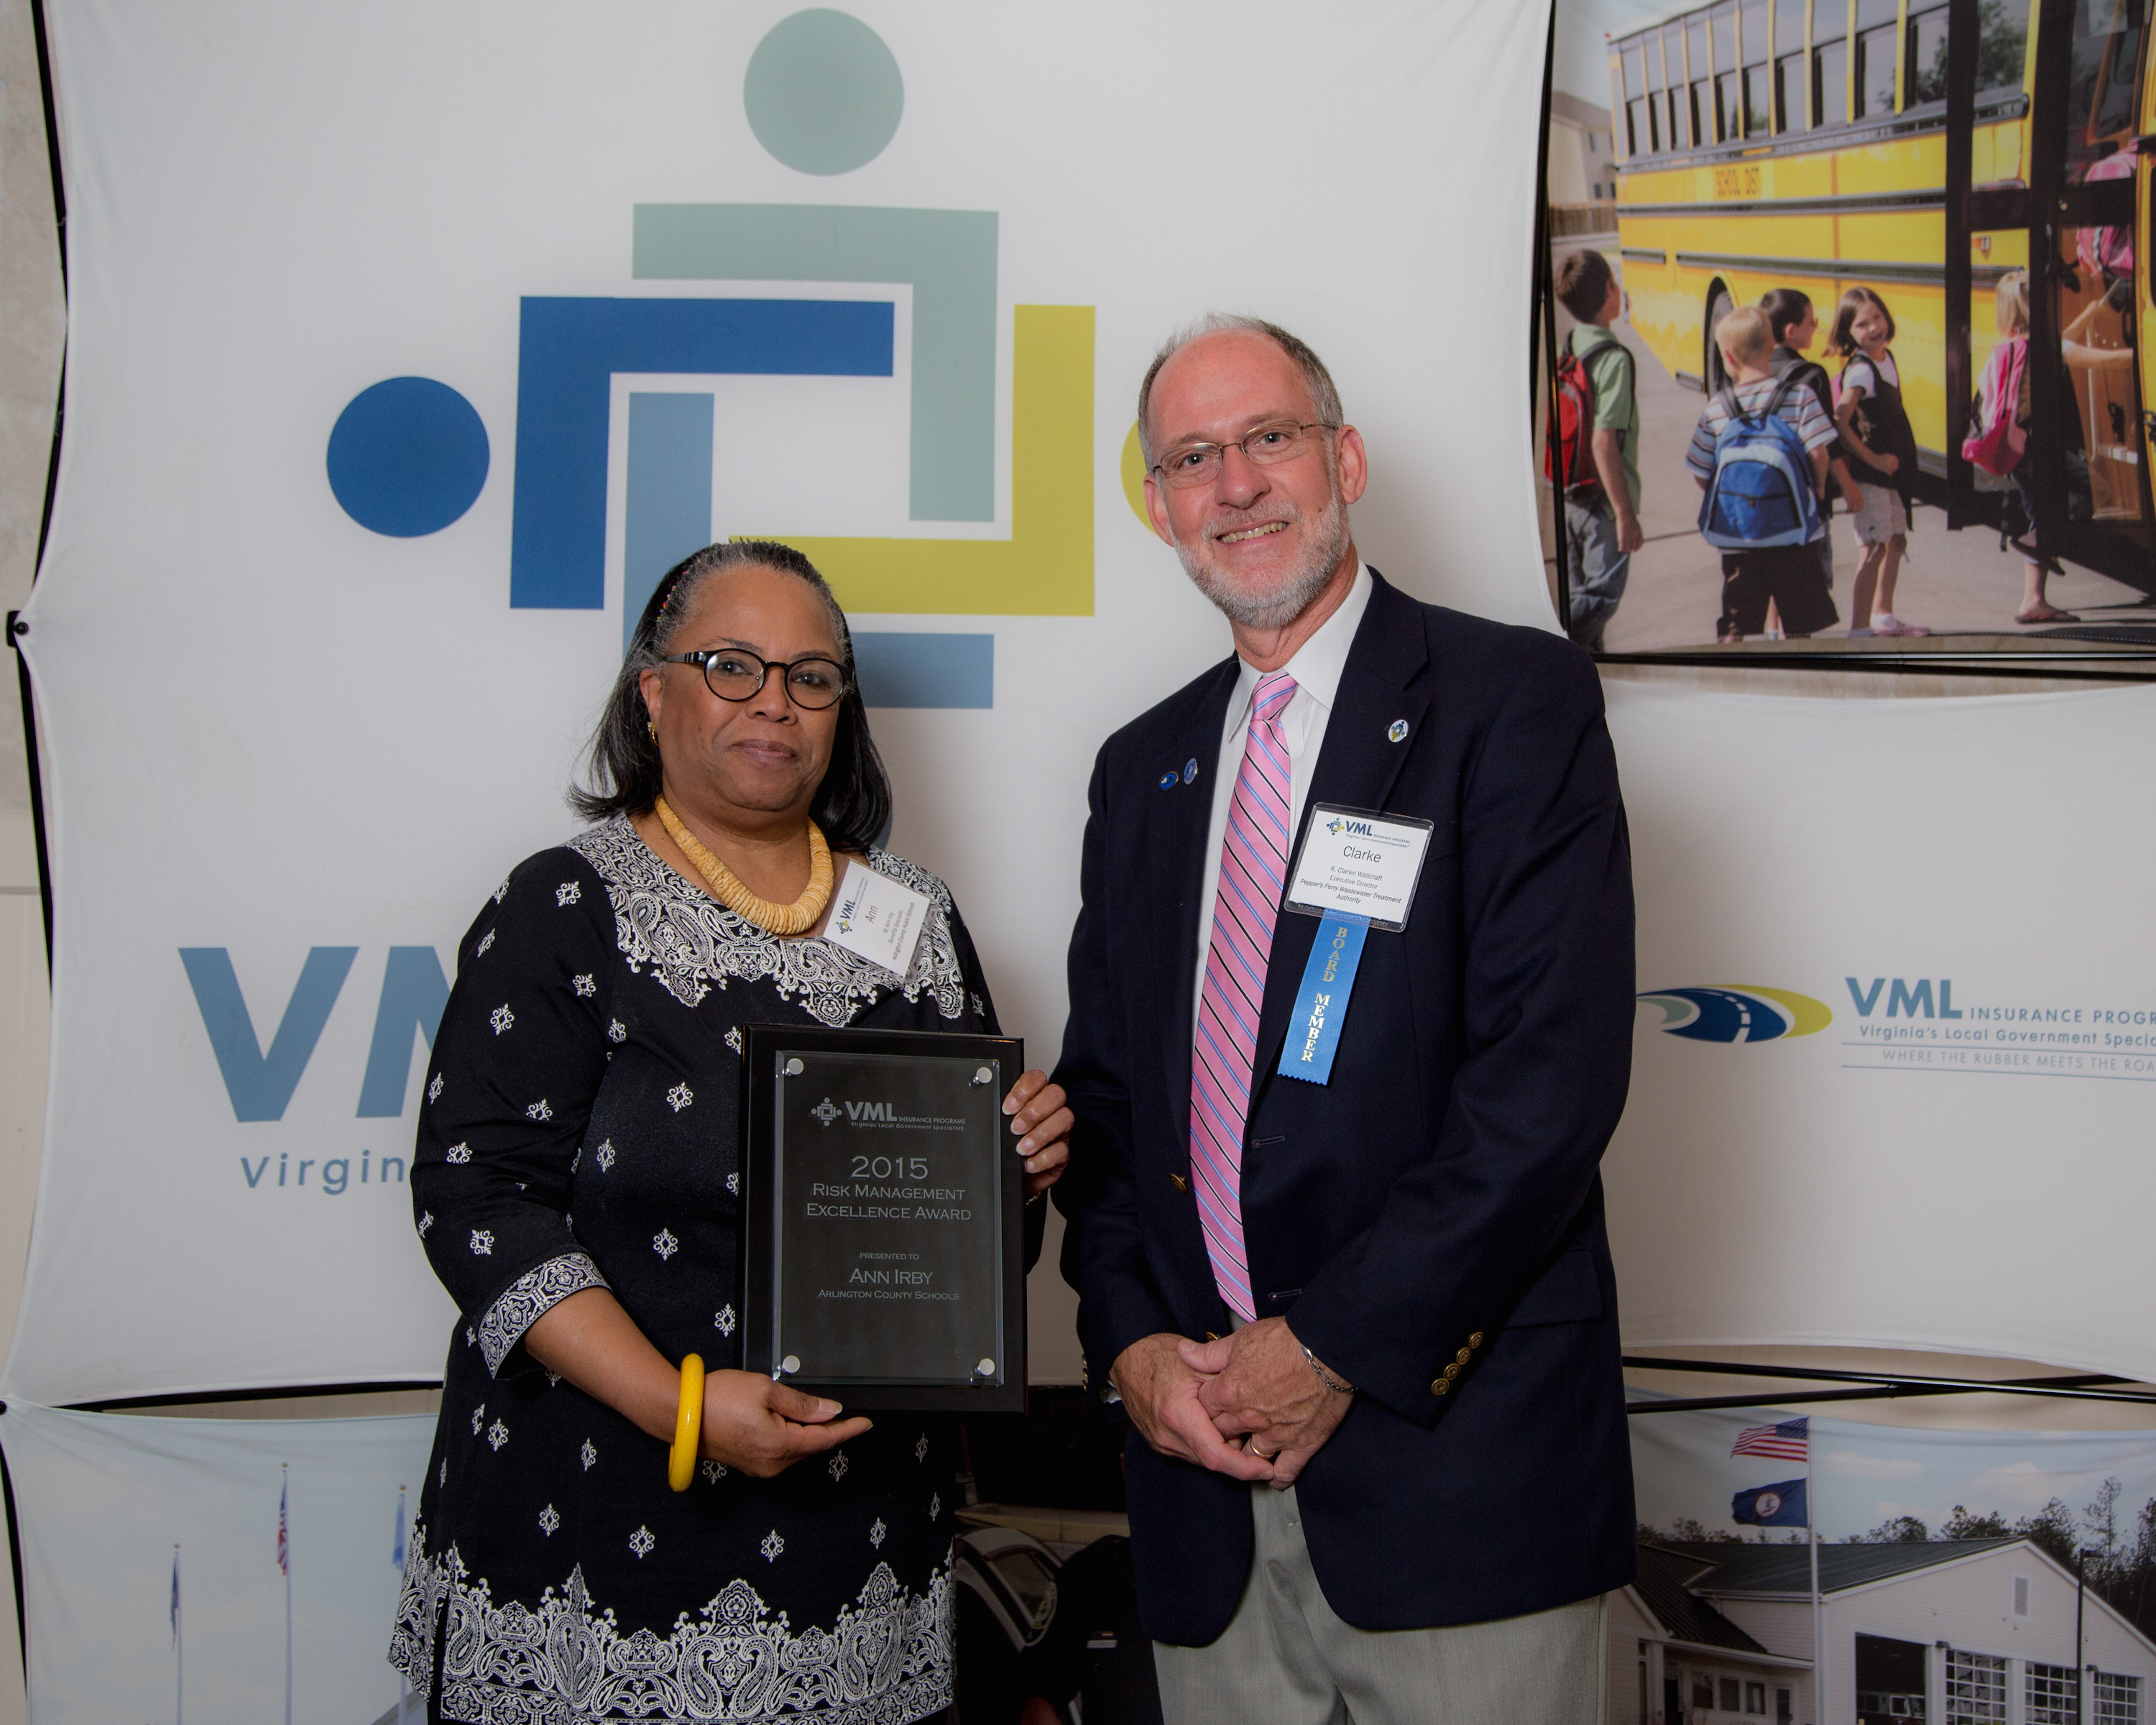 (L to R): Ann Irby with Arlington County Schools and VMLIP Members’ Supervisory Board Member Clarke Wallcraft